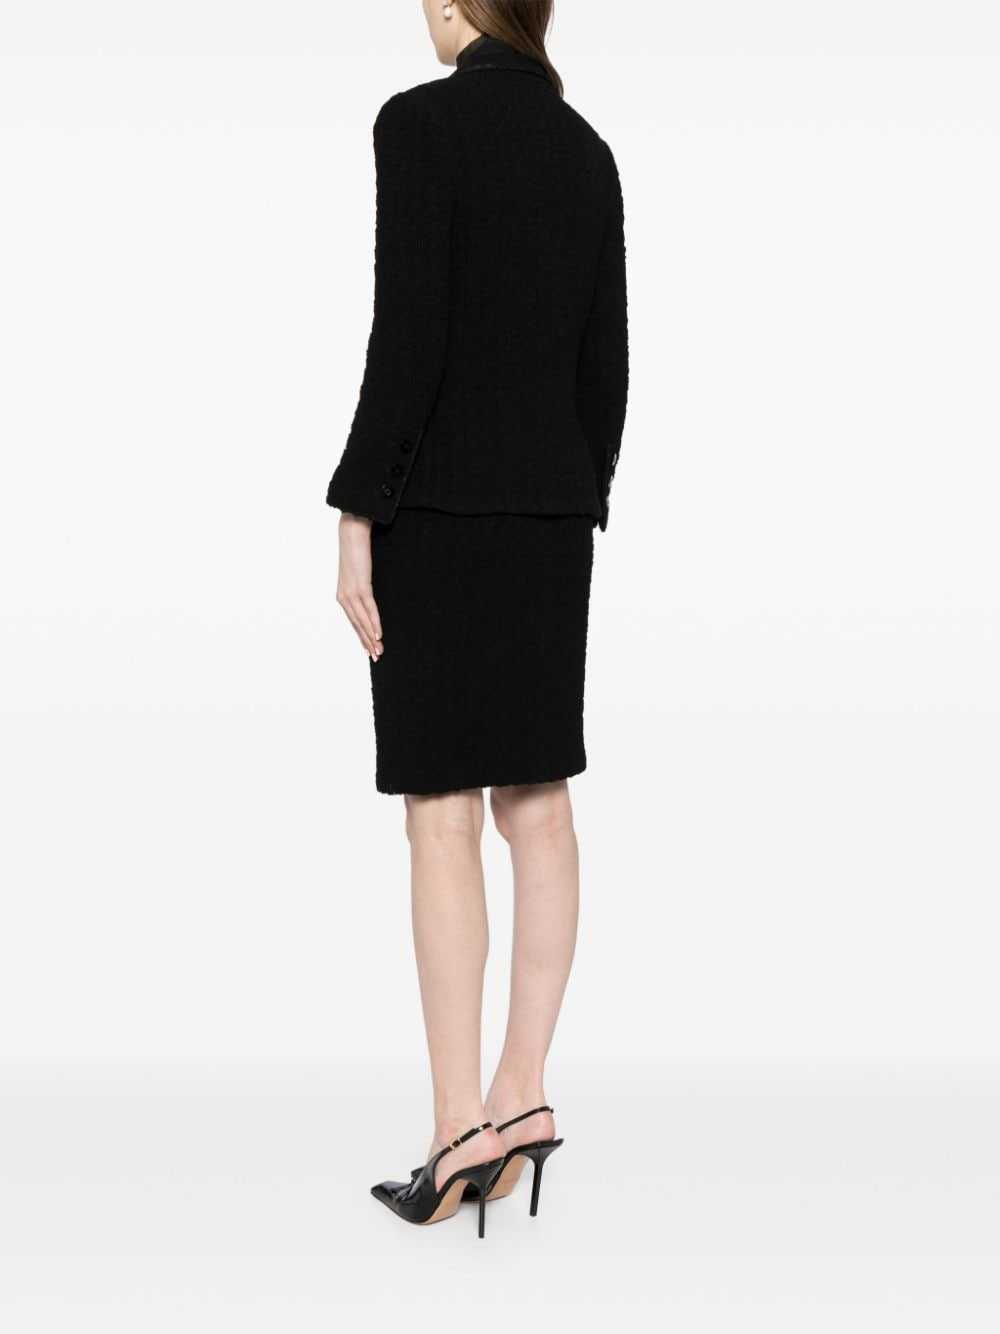 CHANEL Pre-Owned 1998 textured skirt suit - Black - image 4